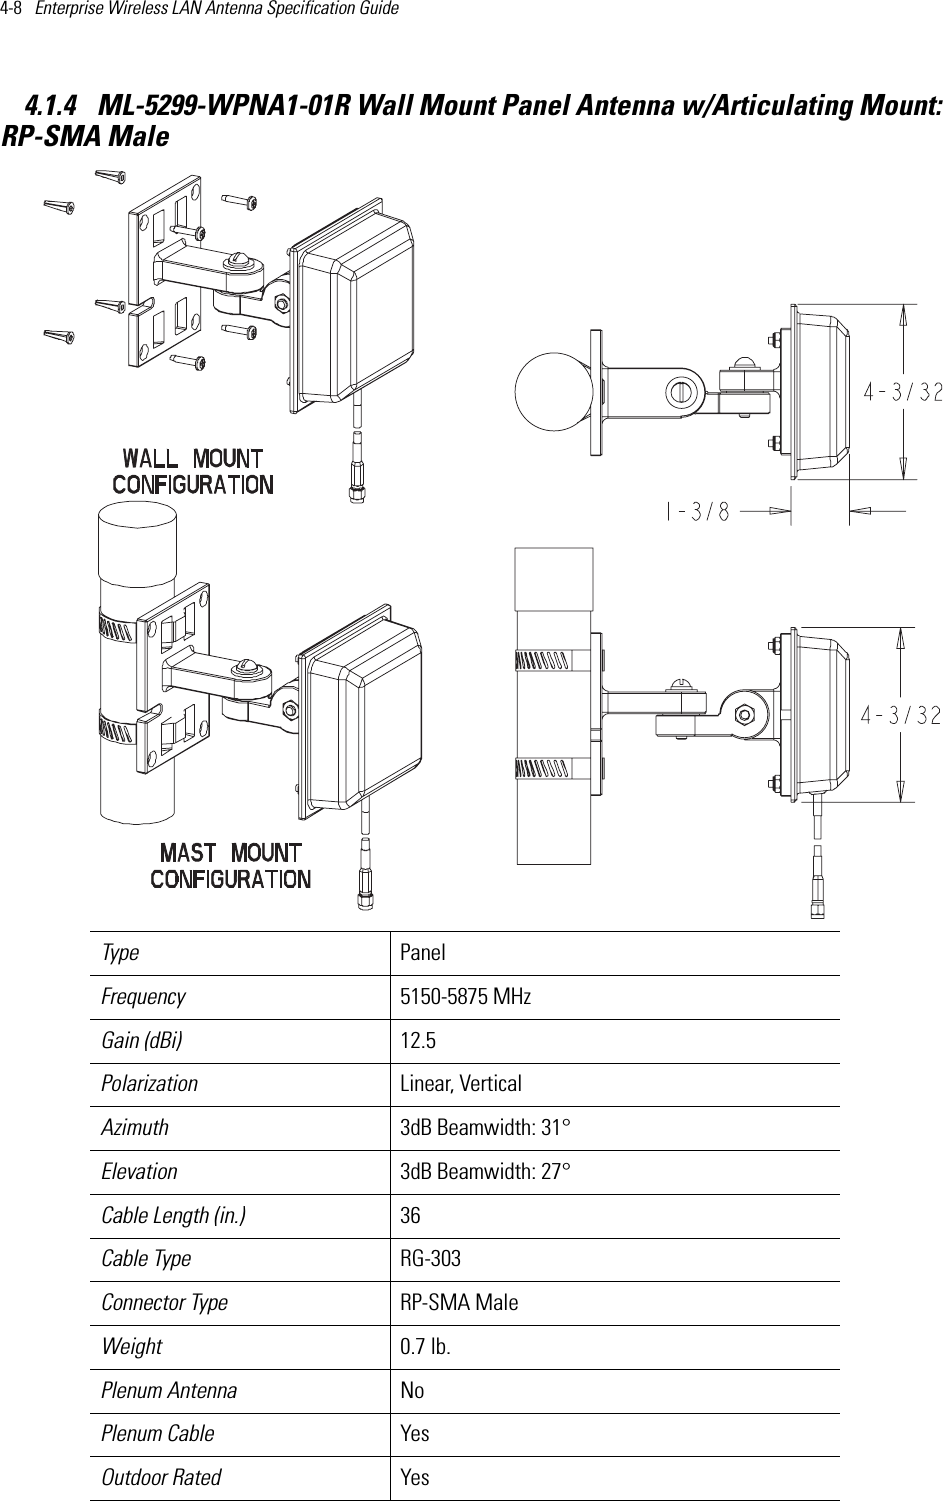 4-8   Enterprise Wireless LAN Antenna Specification Guide 4.1.4  ML-5299-WPNA1-01R Wall Mount Panel Antenna w/Articulating Mount:RP-SMA Male Type PanelFrequency 5150-5875 MHzGain (dBi) 12.5Polarization Linear, VerticalAzimuth 3dB Beamwidth: 31°Elevation 3dB Beamwidth: 27°Cable Length (in.) 36Cable Type RG-303Connector Type RP-SMA MaleWeight 0.7 lb.Plenum Antenna NoPlenum Cable YesOutdoor Rated Yes